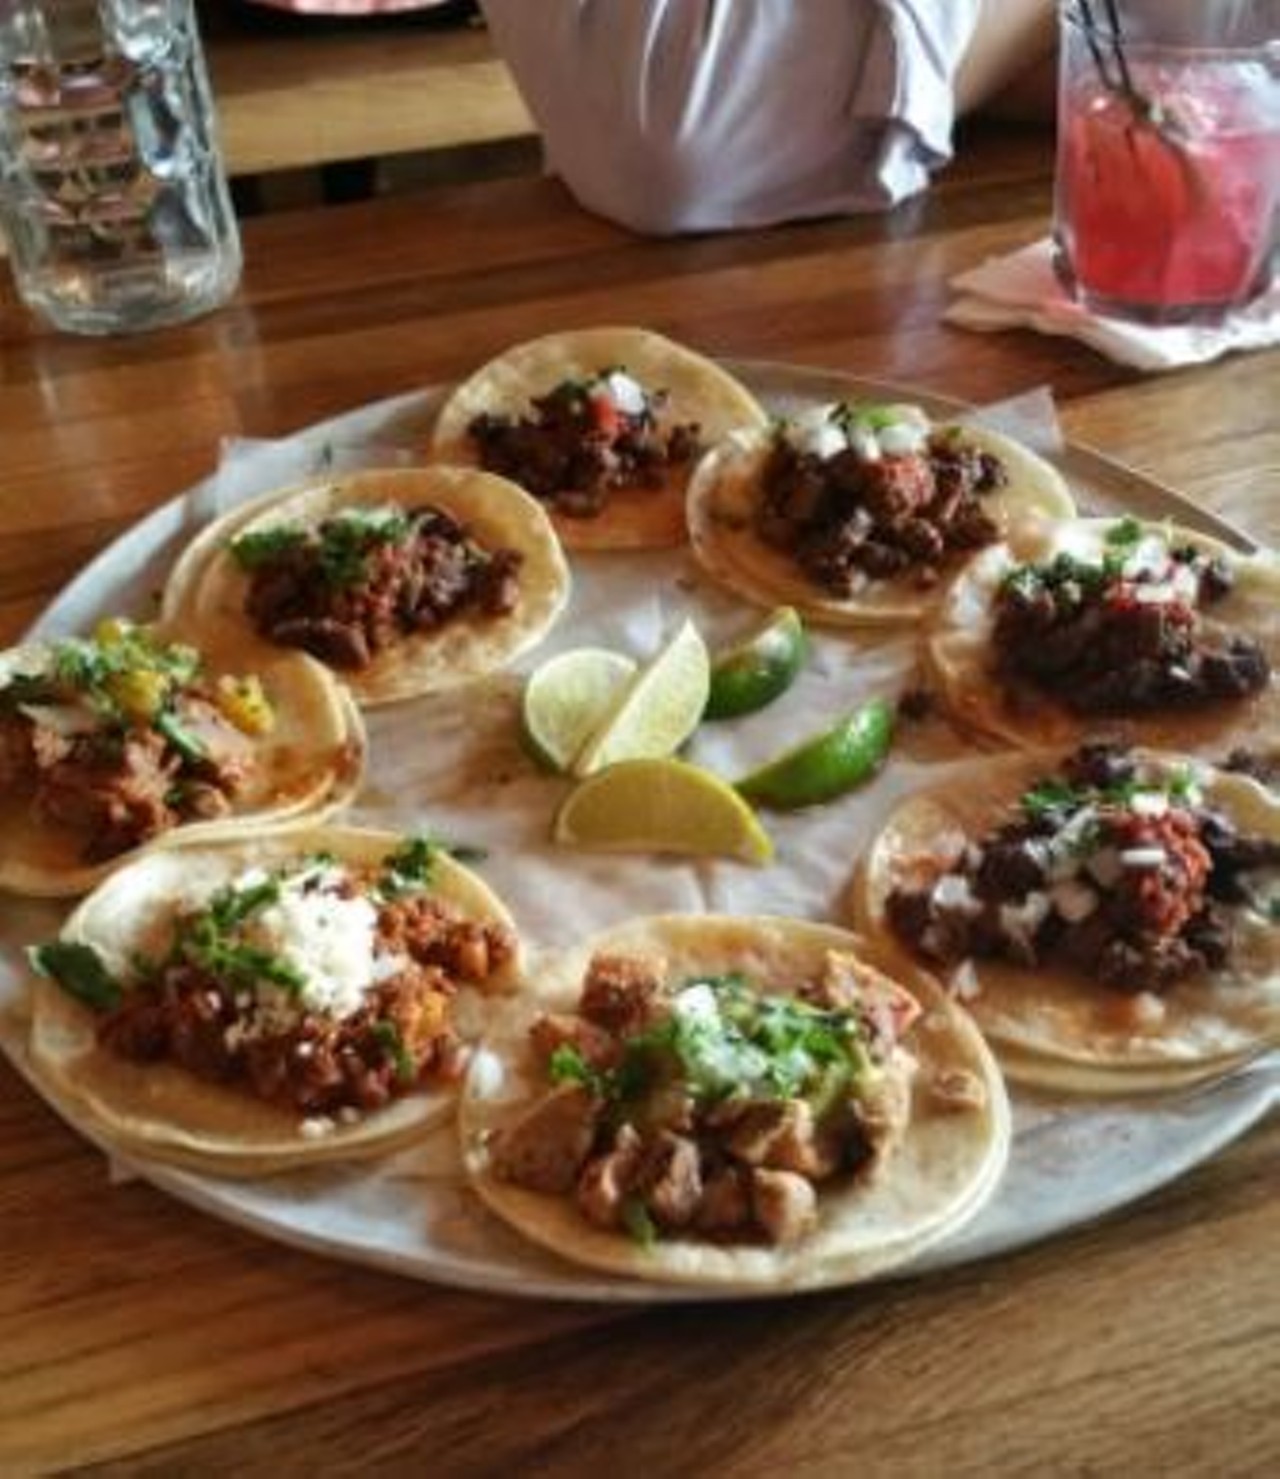 What to order - Assorted Tacos 
With so many options, opt for all of them. At 2.50 dollars each, some taco options include tacos al pastor with marinated pork, grilled pineapple with jalapeno onion pickle and adobado de pollo with chili lime grilled chicken and salsa verde.
Photo via Noomi J